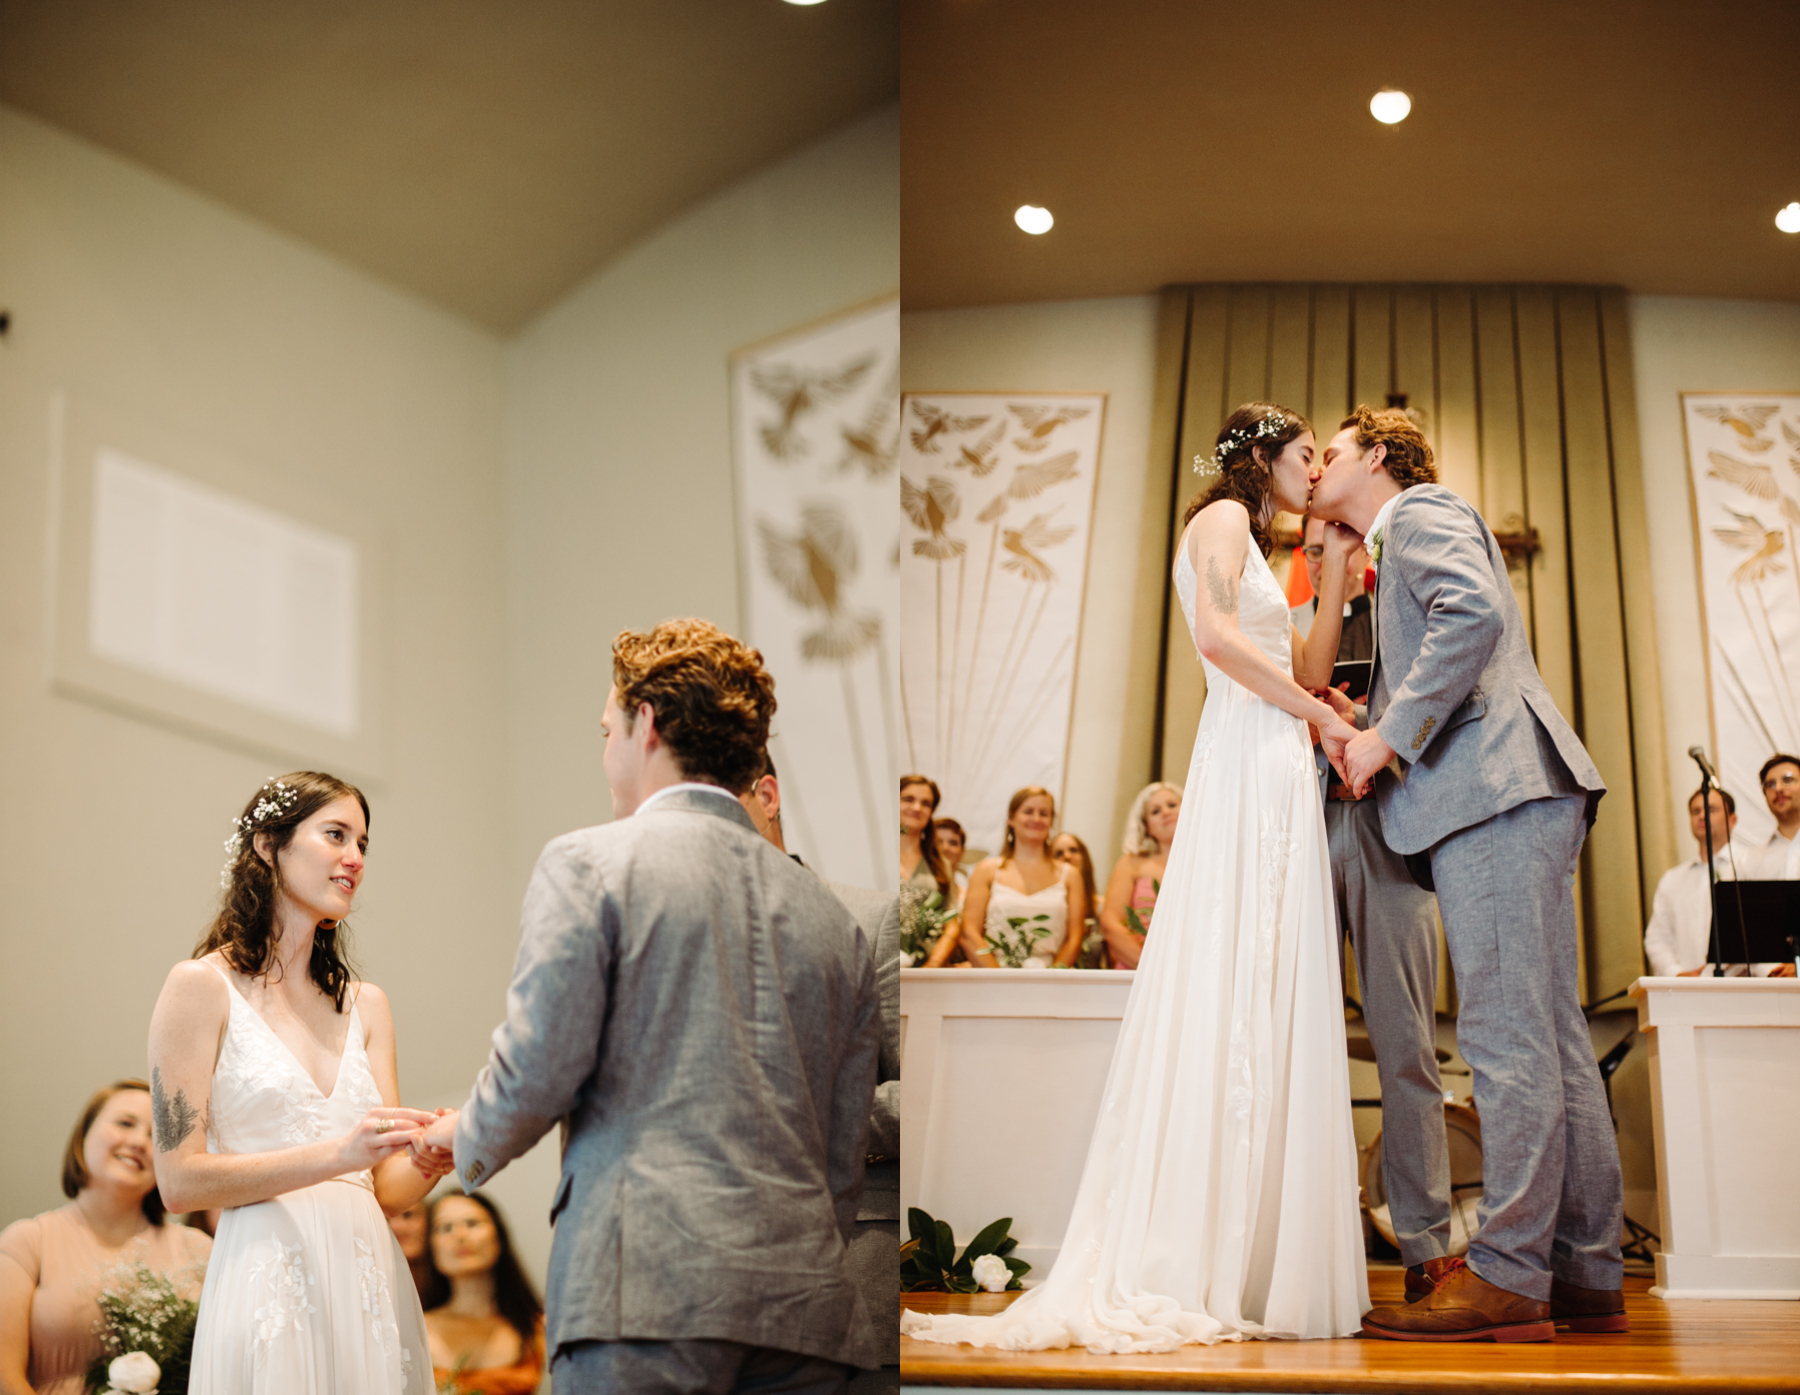 The first kiss inside redeemer church at a downtown knoxville wedding